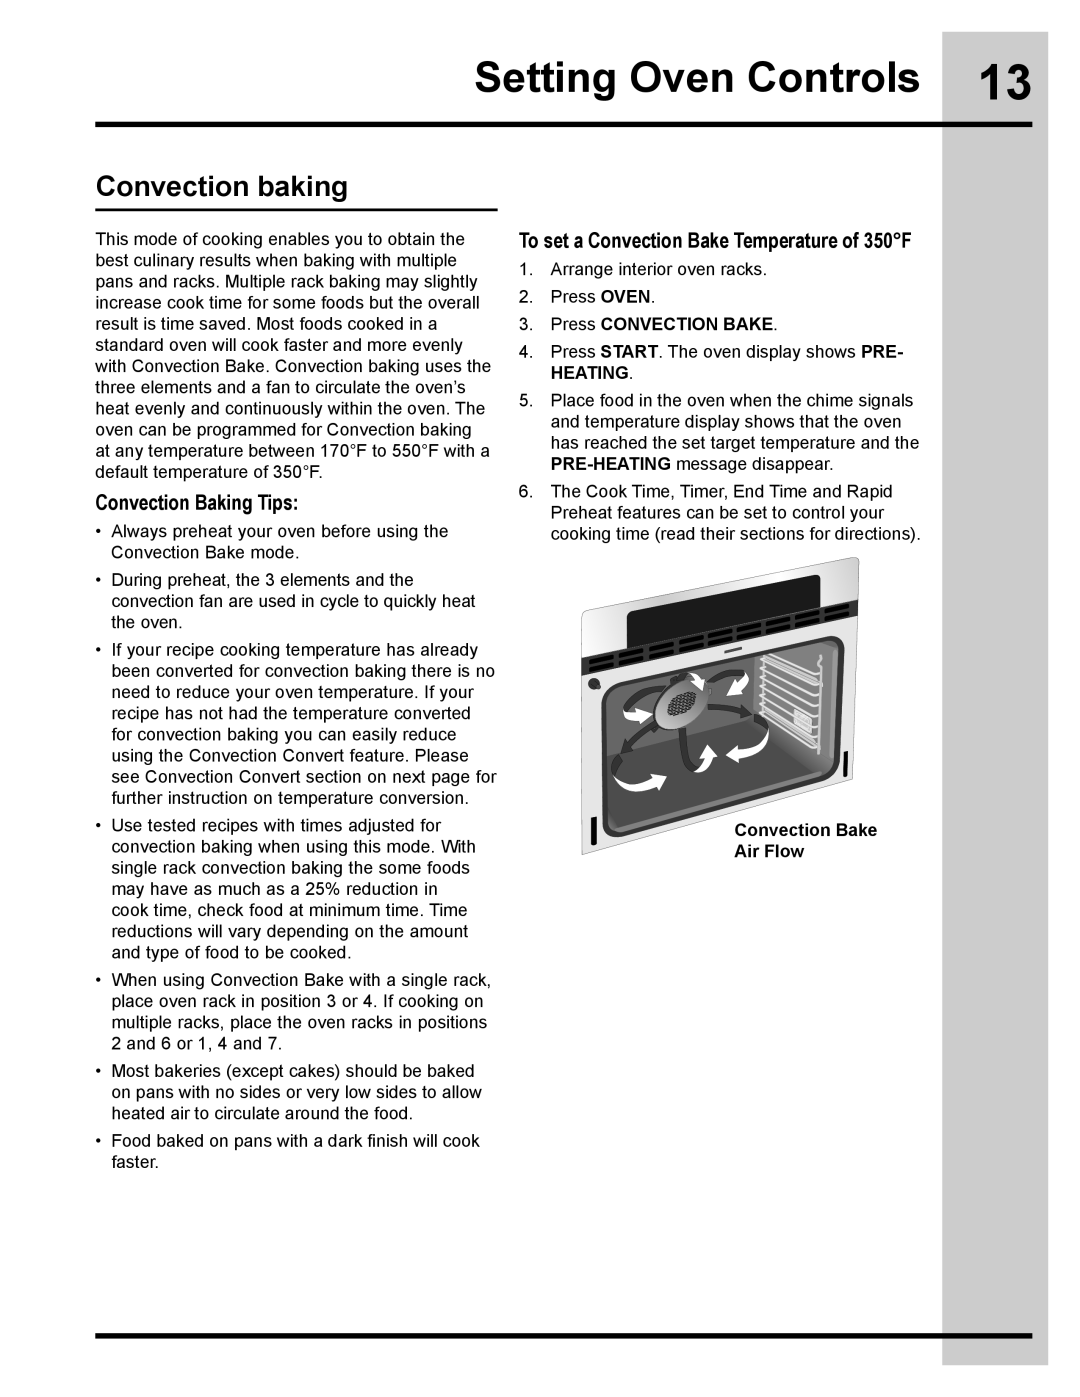 Electrolux 318205134 Convection baking, Convection Baking Tips, To set a Convection Bake Temperature of 350F, Heating 